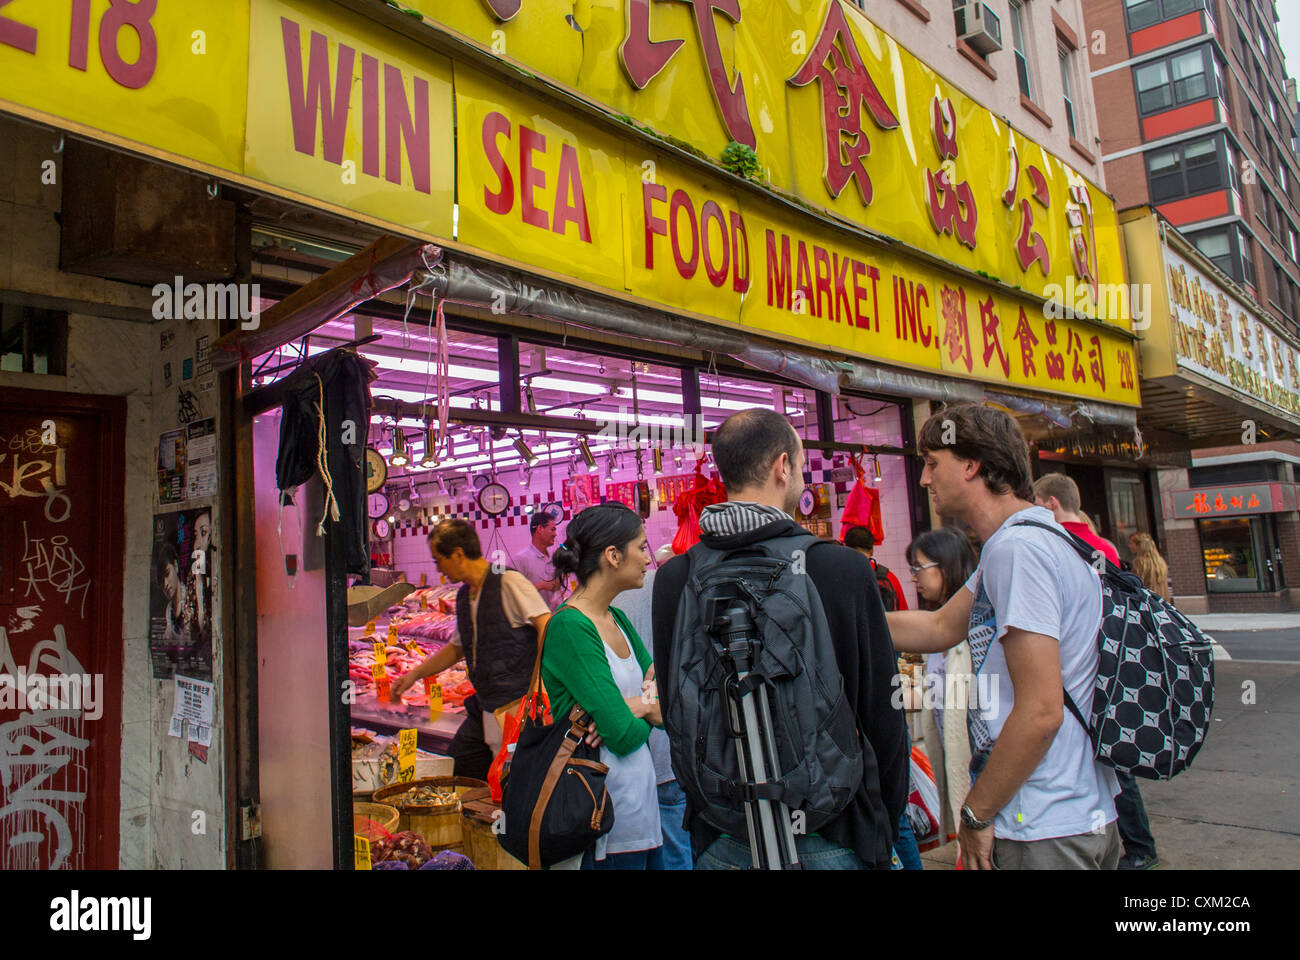 New York, NY, USA, Group Tourists on Sidewalk in Front of Chinese  Market, 'Win Sea Food market' on Street Scenes, Chinatown, multi ethnic store street Stock Photo